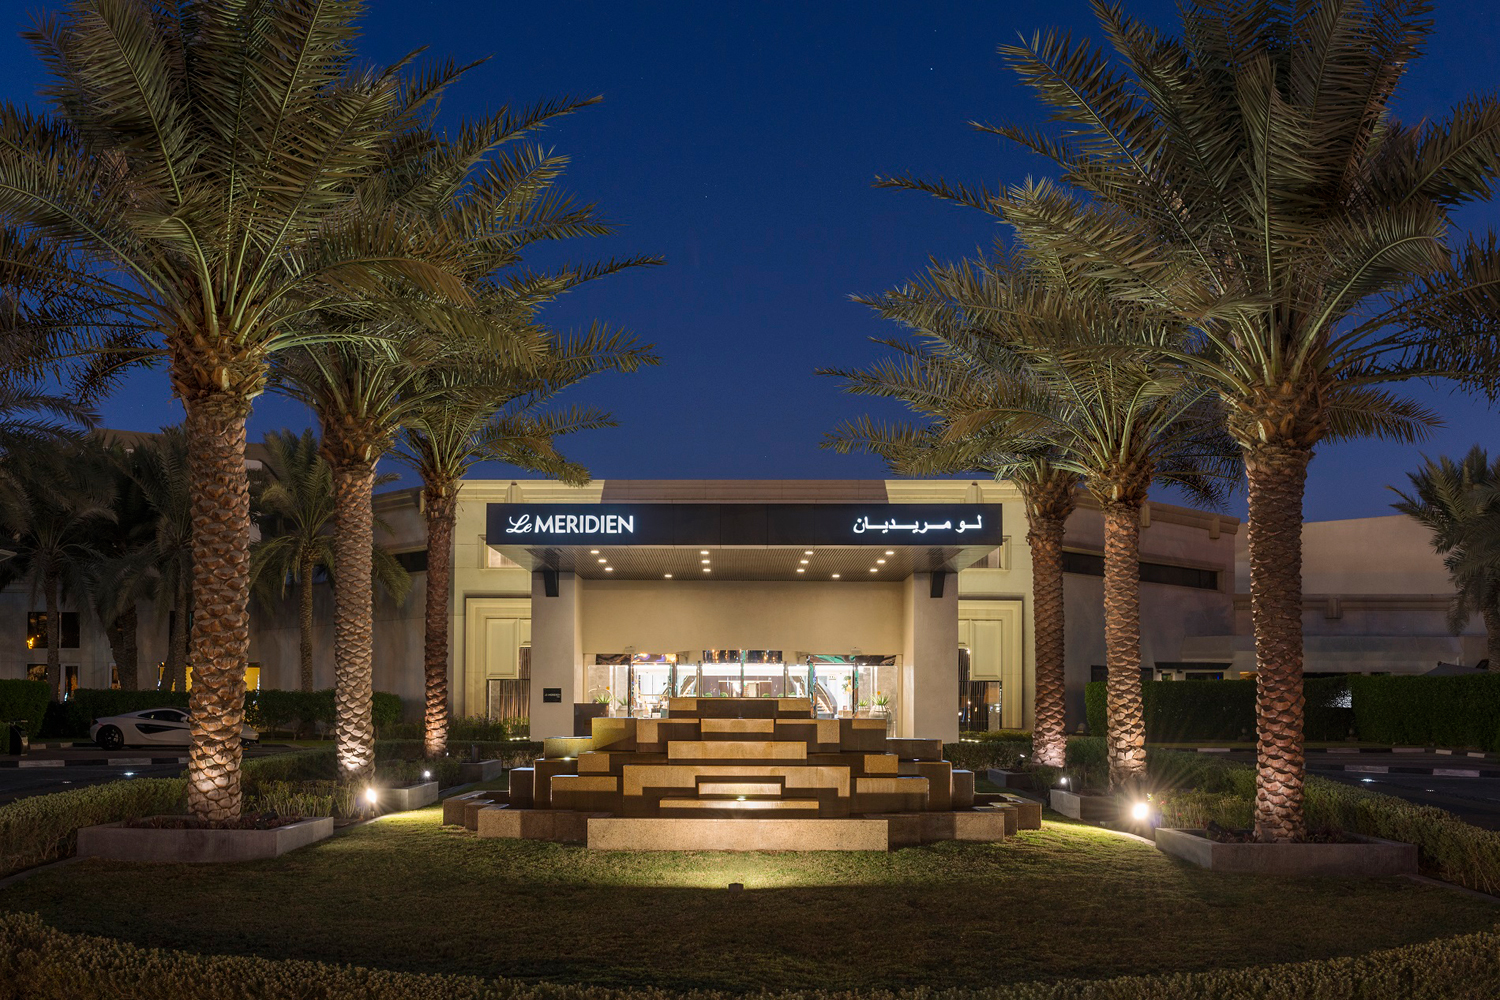 Le Meridien Dubai Hotel reopens with new look - News - HOTELIER MIDDLE EAST